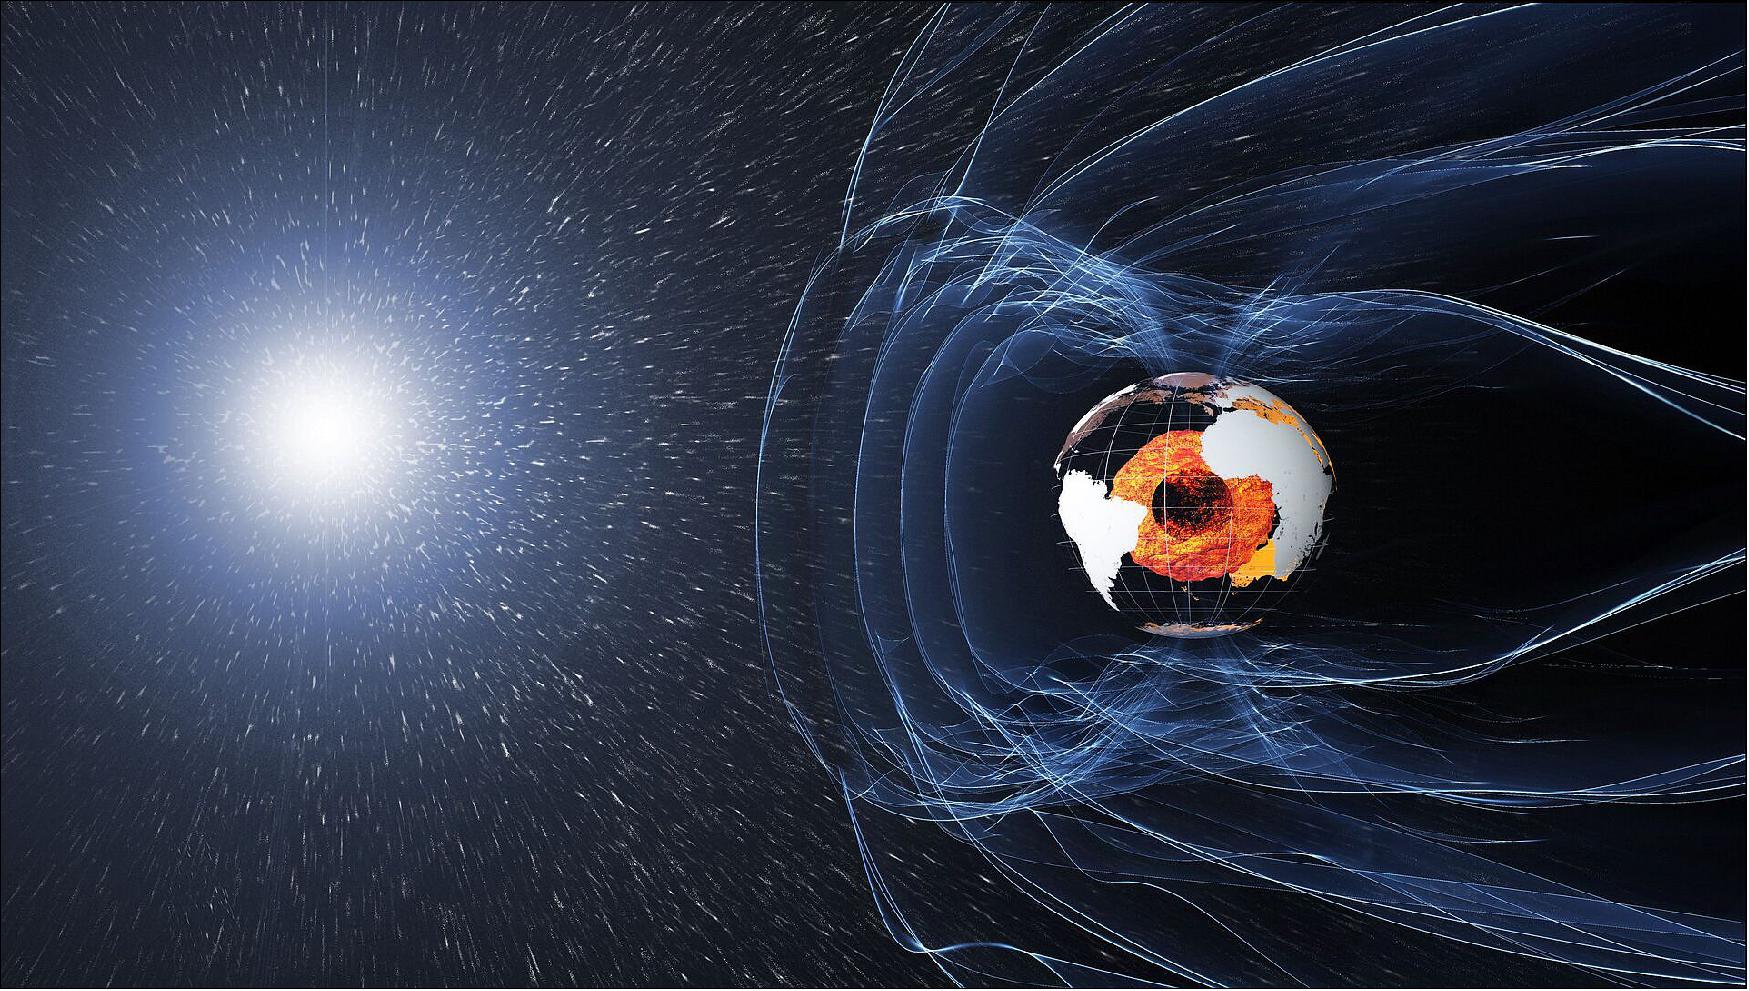 Figure 64: The force that protects our planet. The magnetic field and electric currents in and around Earth generate complex forces that have immeasurable impact on every day life. The field can be thought of as a huge bubble, protecting us from cosmic radiation and charged particles that bombard Earth in solar winds (image credit: ESA/ATG medialab)